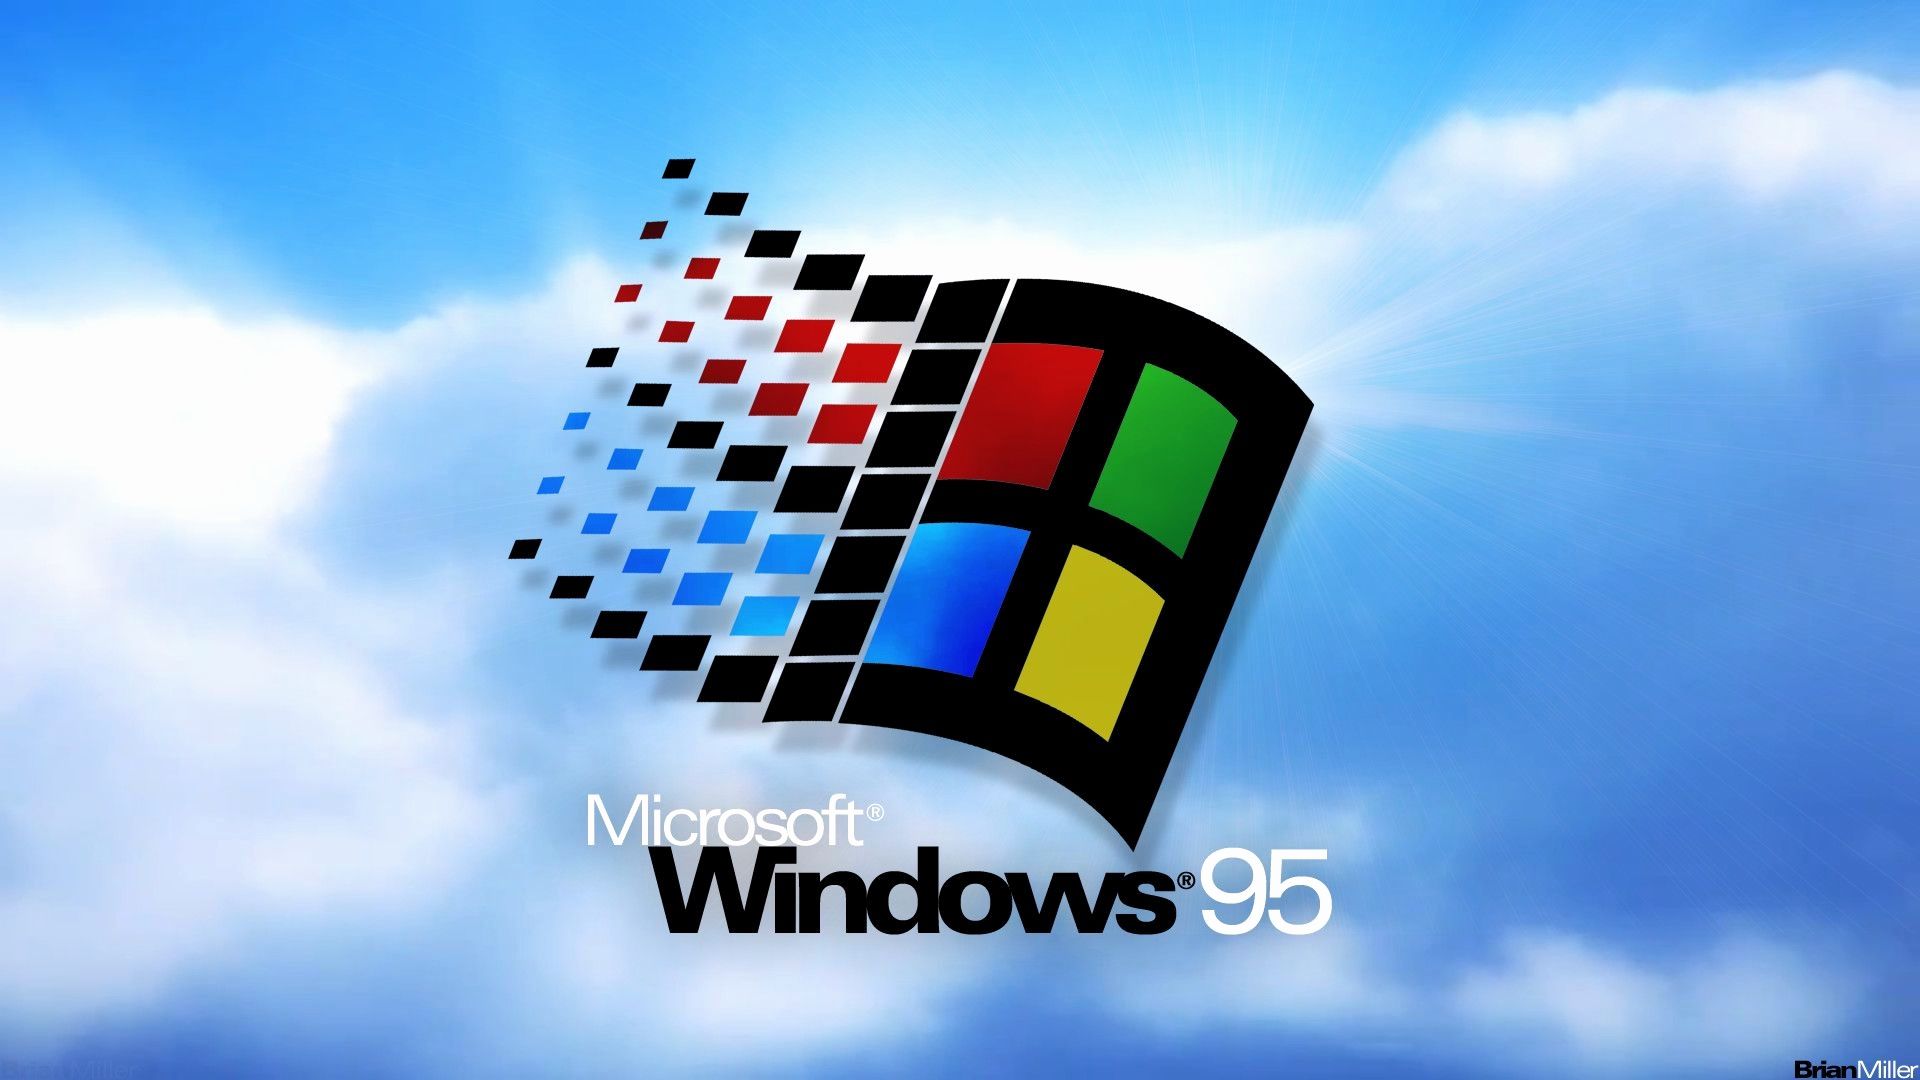 Windows Wallpapers 1366x768 Group (98+)